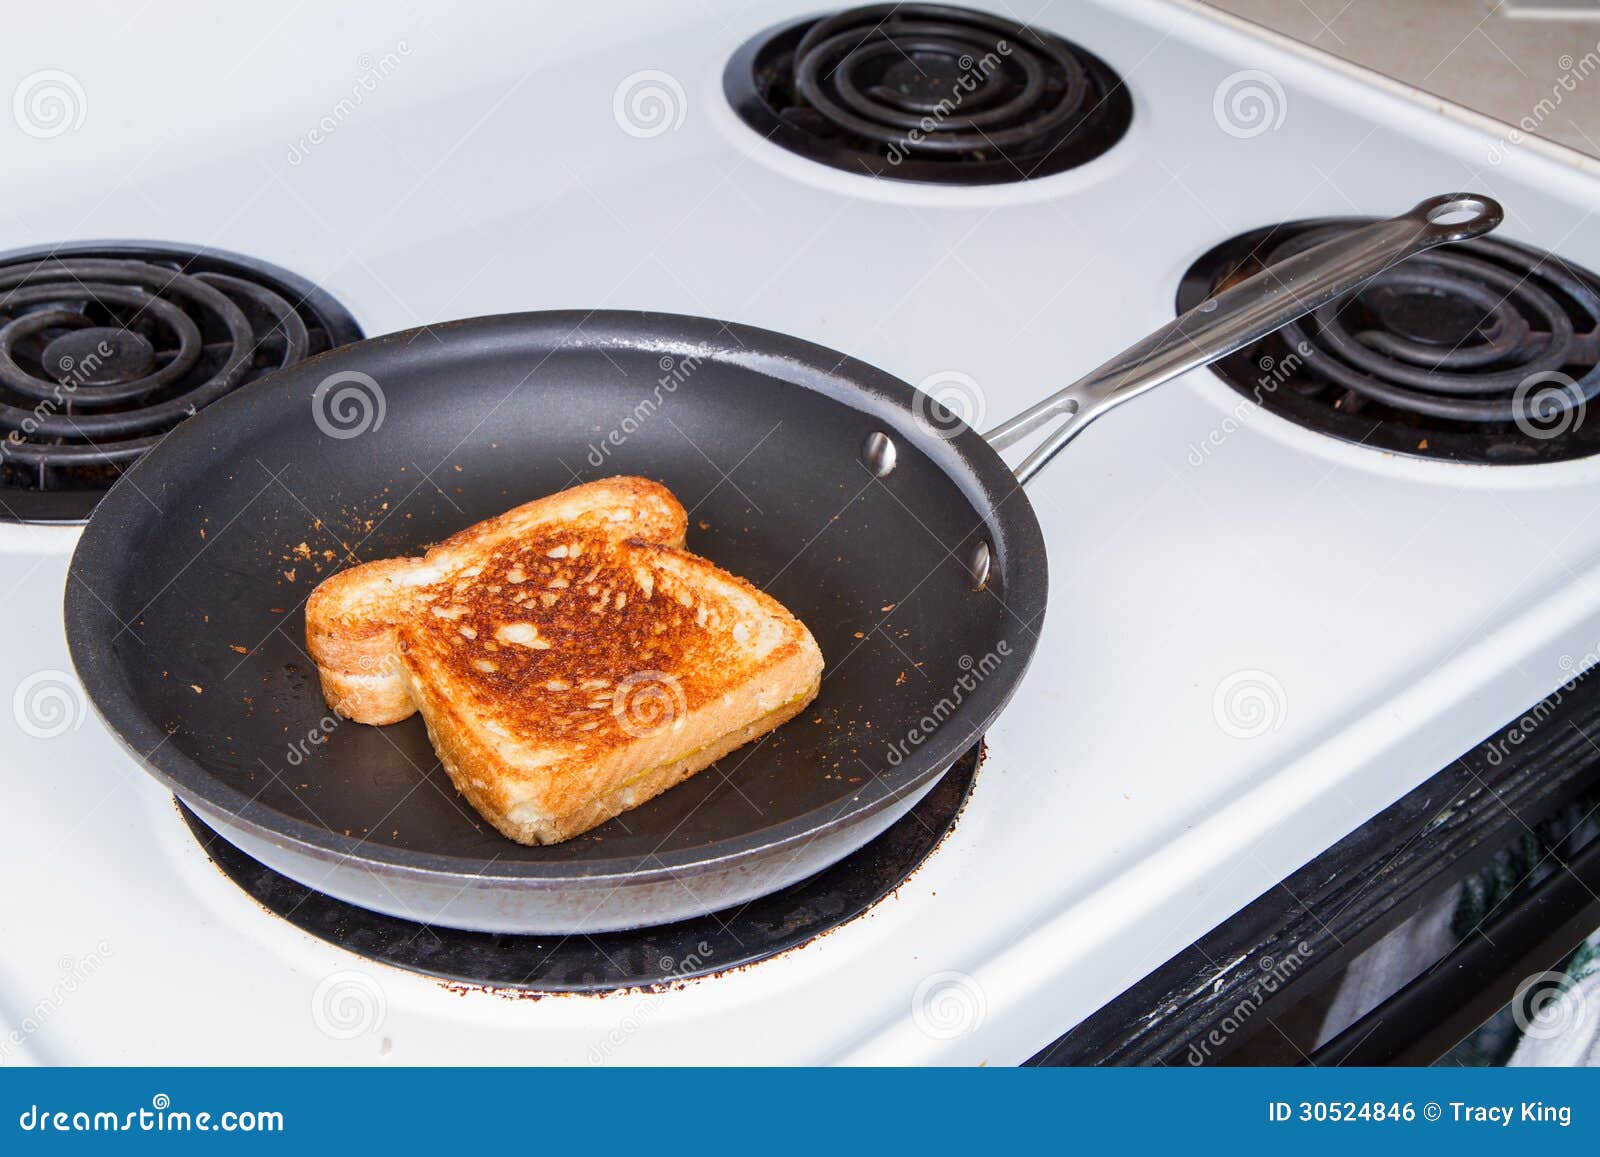 Grilling Up a Cheese Sandwich Stock Photo - Image of heat, lunch: 30524846